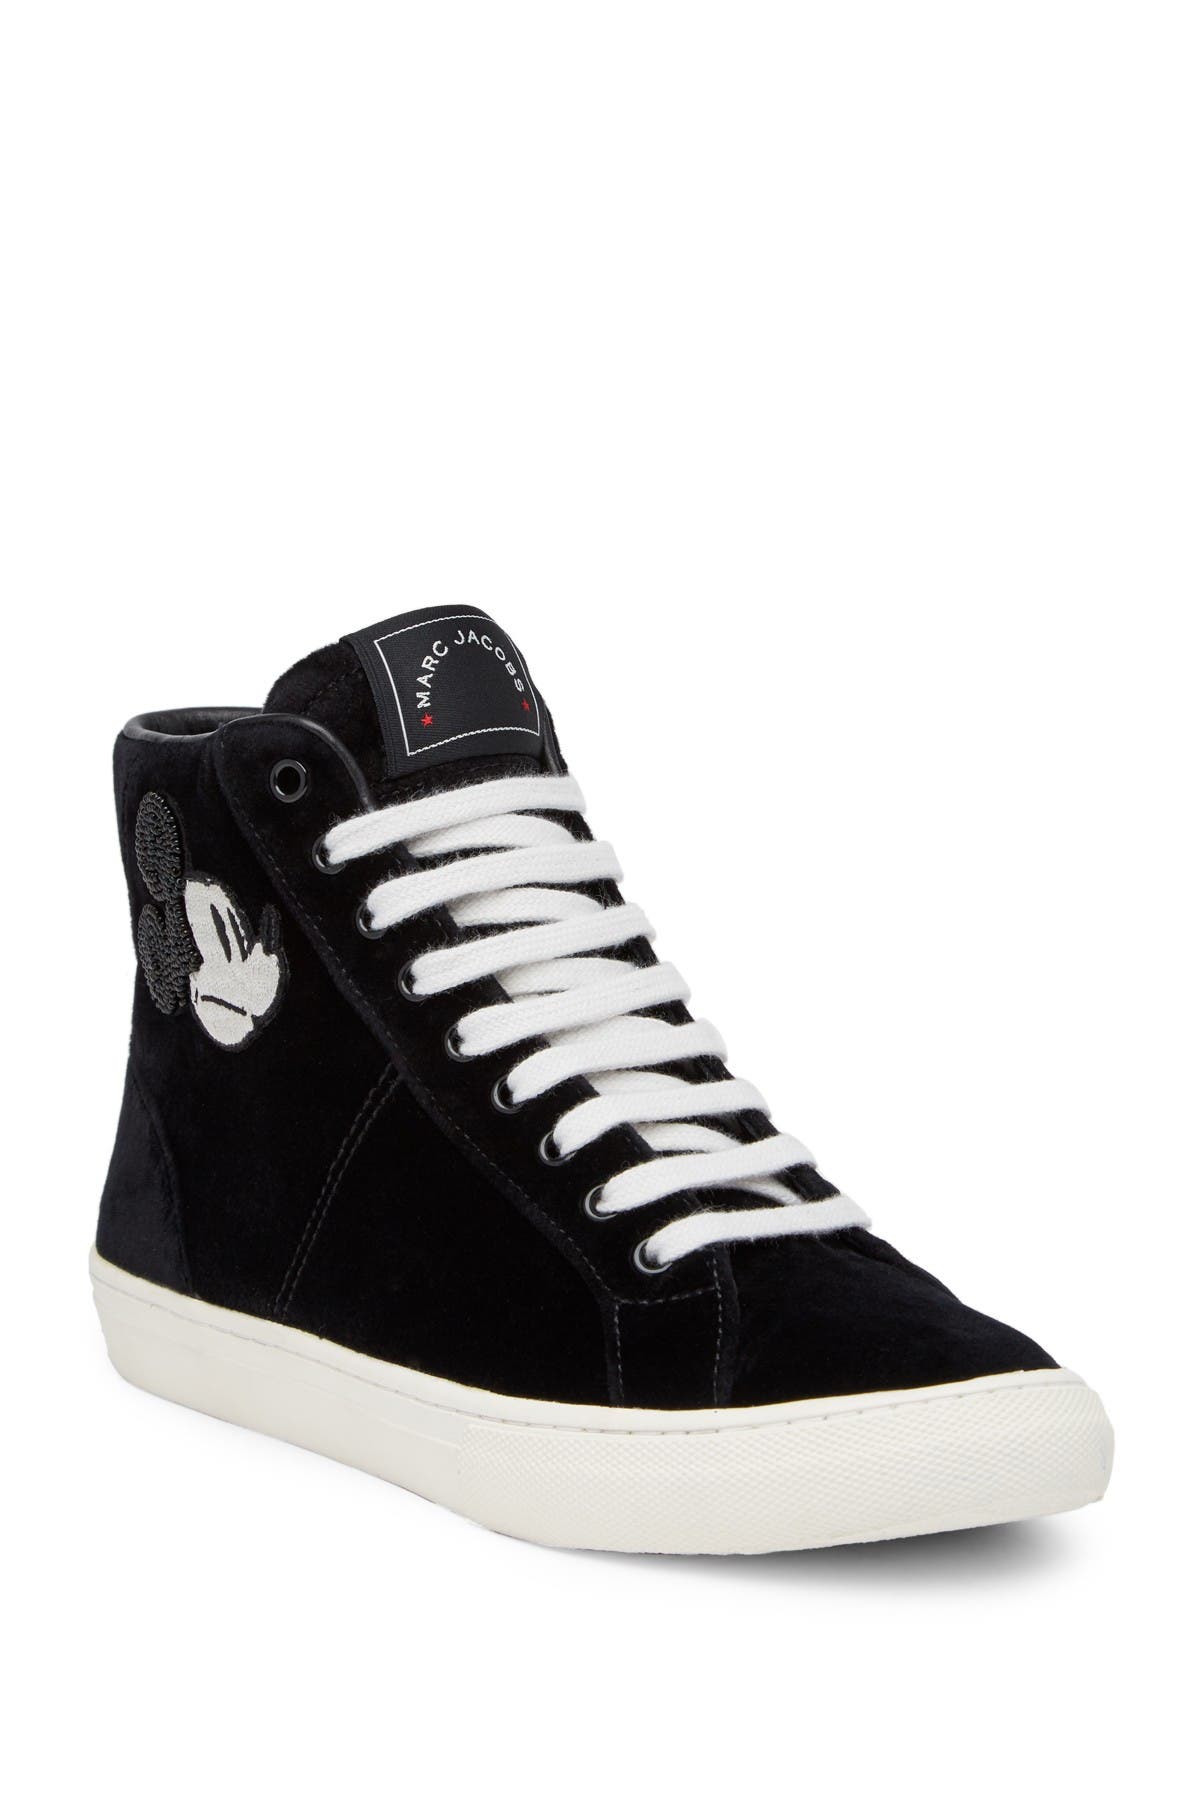 mickey mouse high top shoes